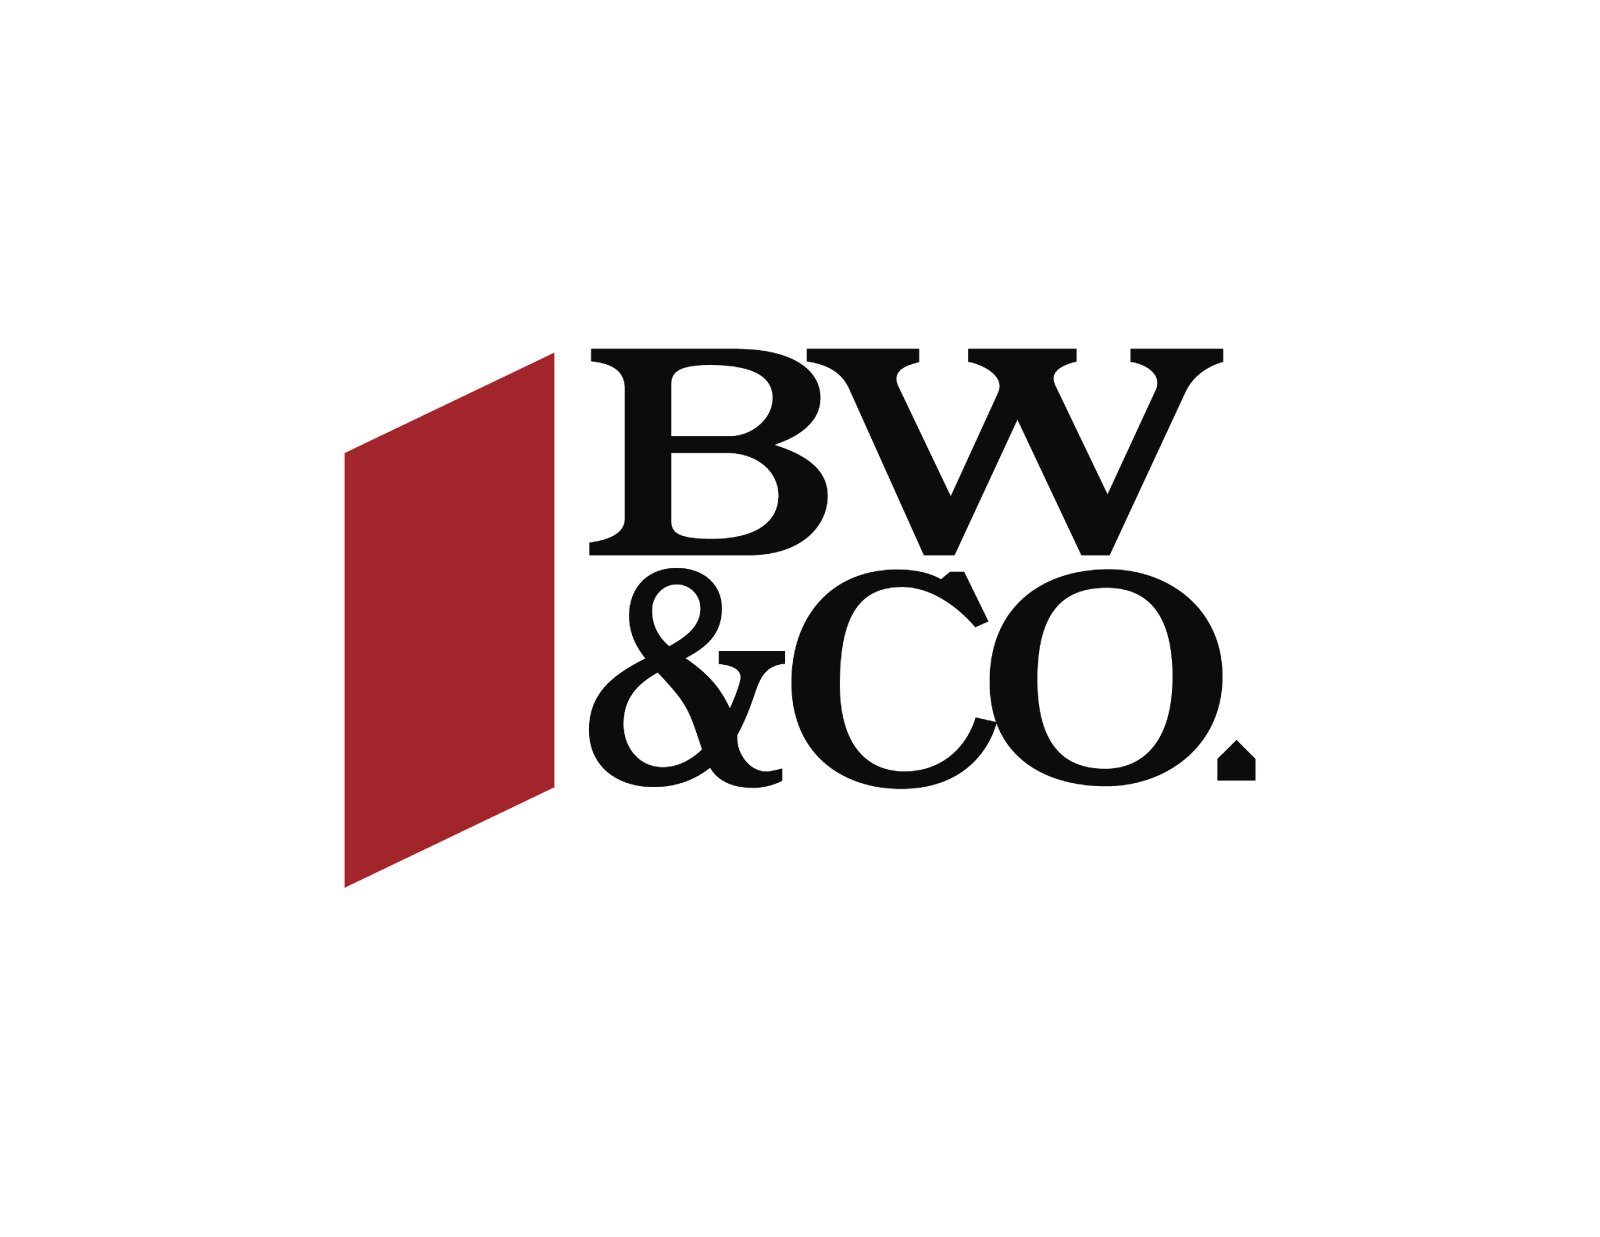 BW&CO., Tuesday, December 7, 2021, Press release picture